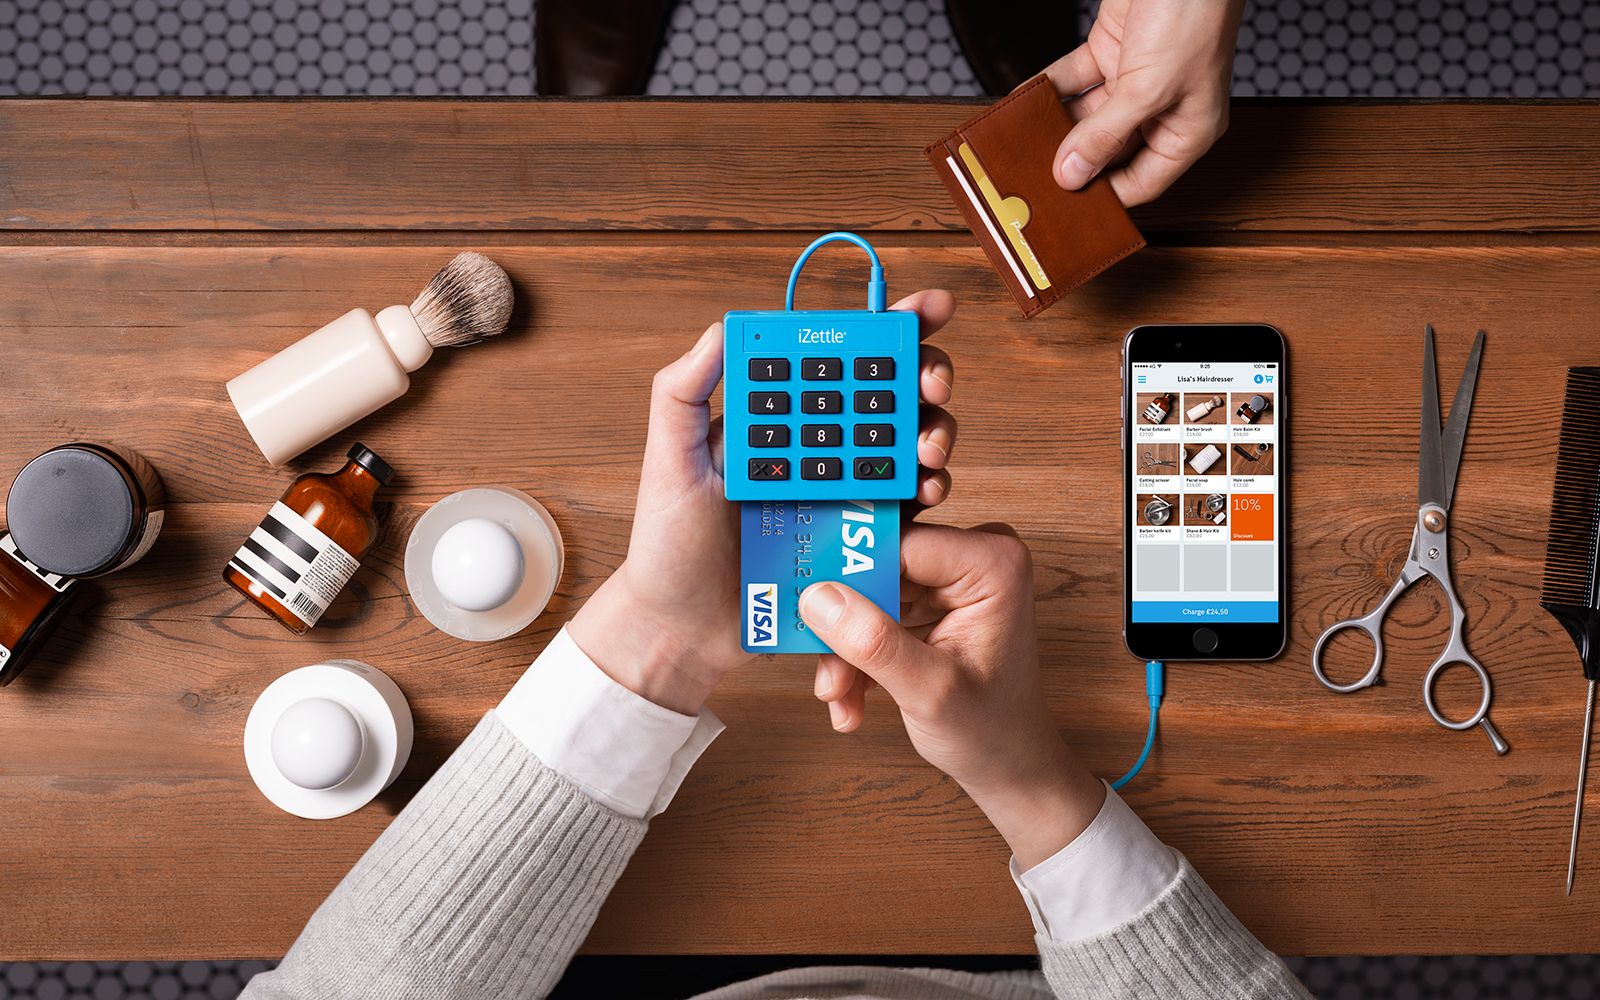 now anyone can take chip and pin payments thanks to world first free card reader from izettle image 1